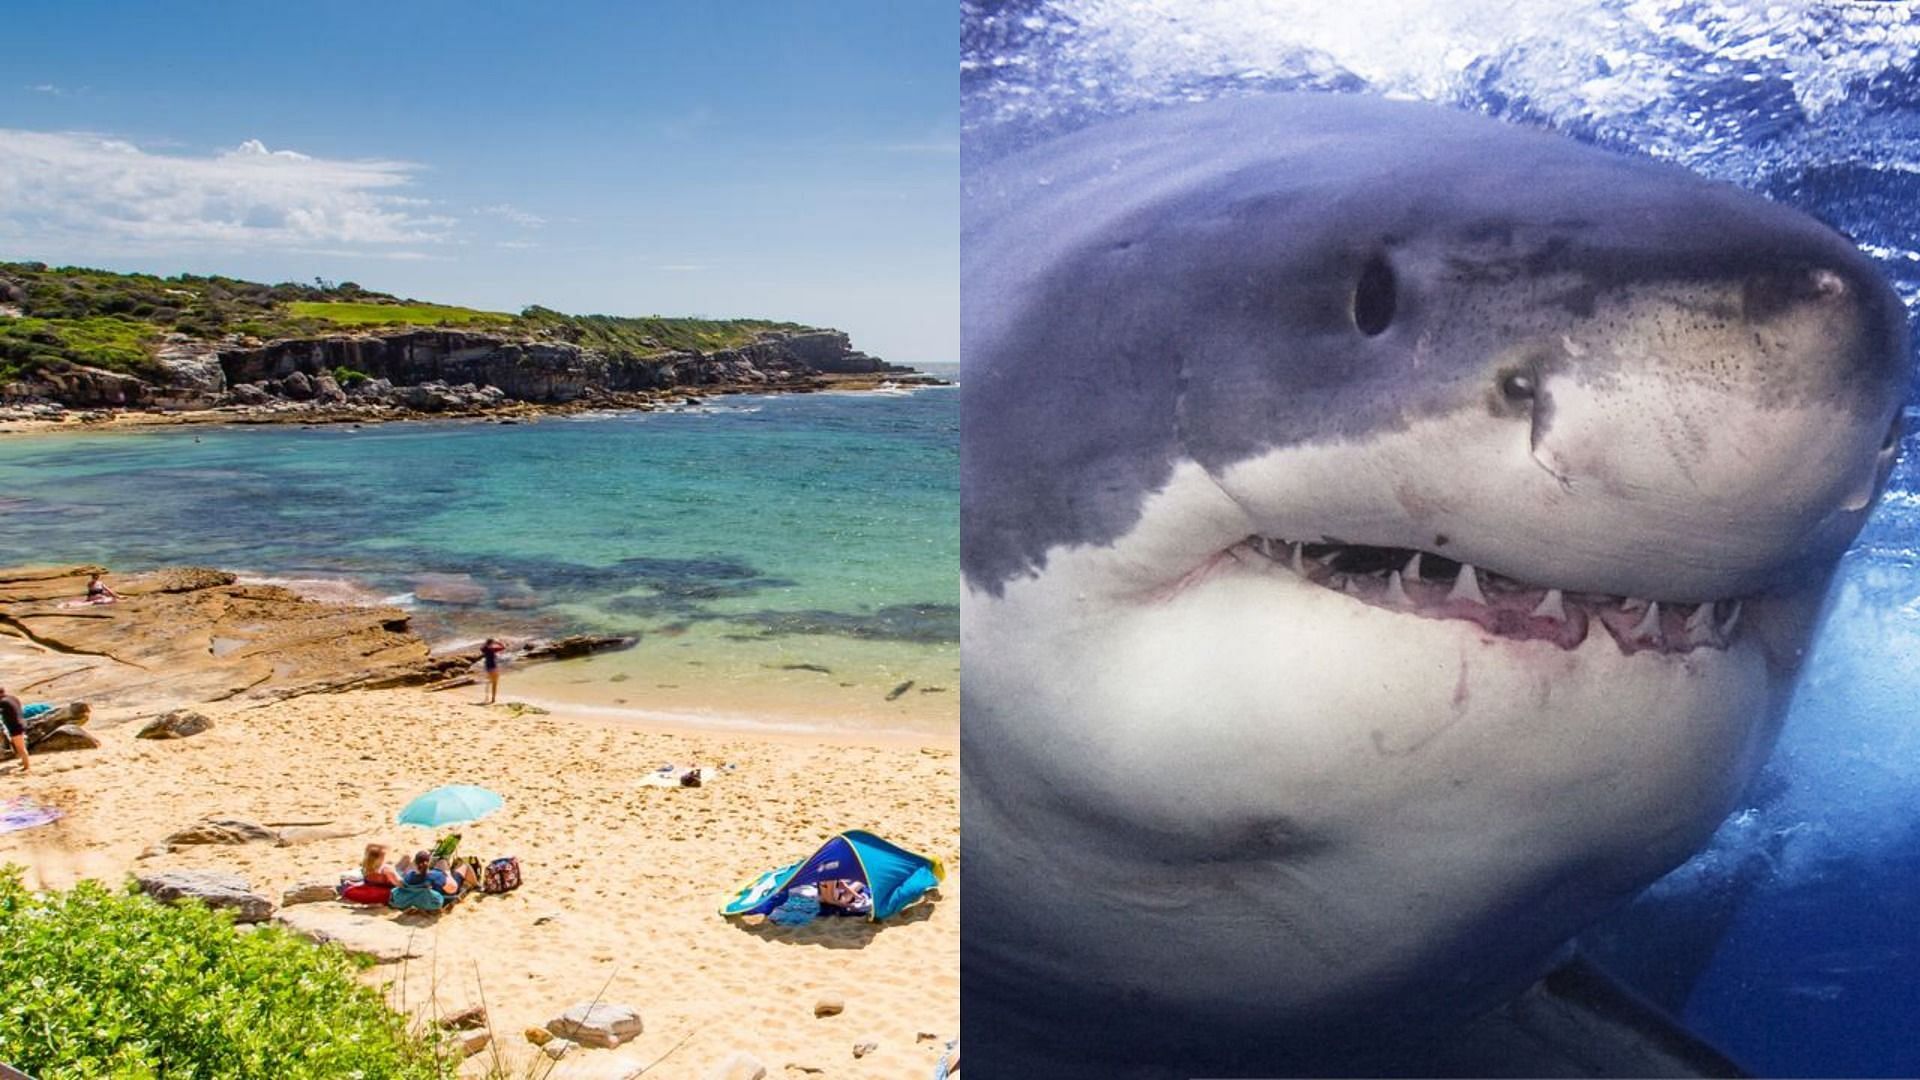 A swimmer recently lost his life in a fatal shark attack on Little Bay Beach in Sydney (Image via Getty Images)